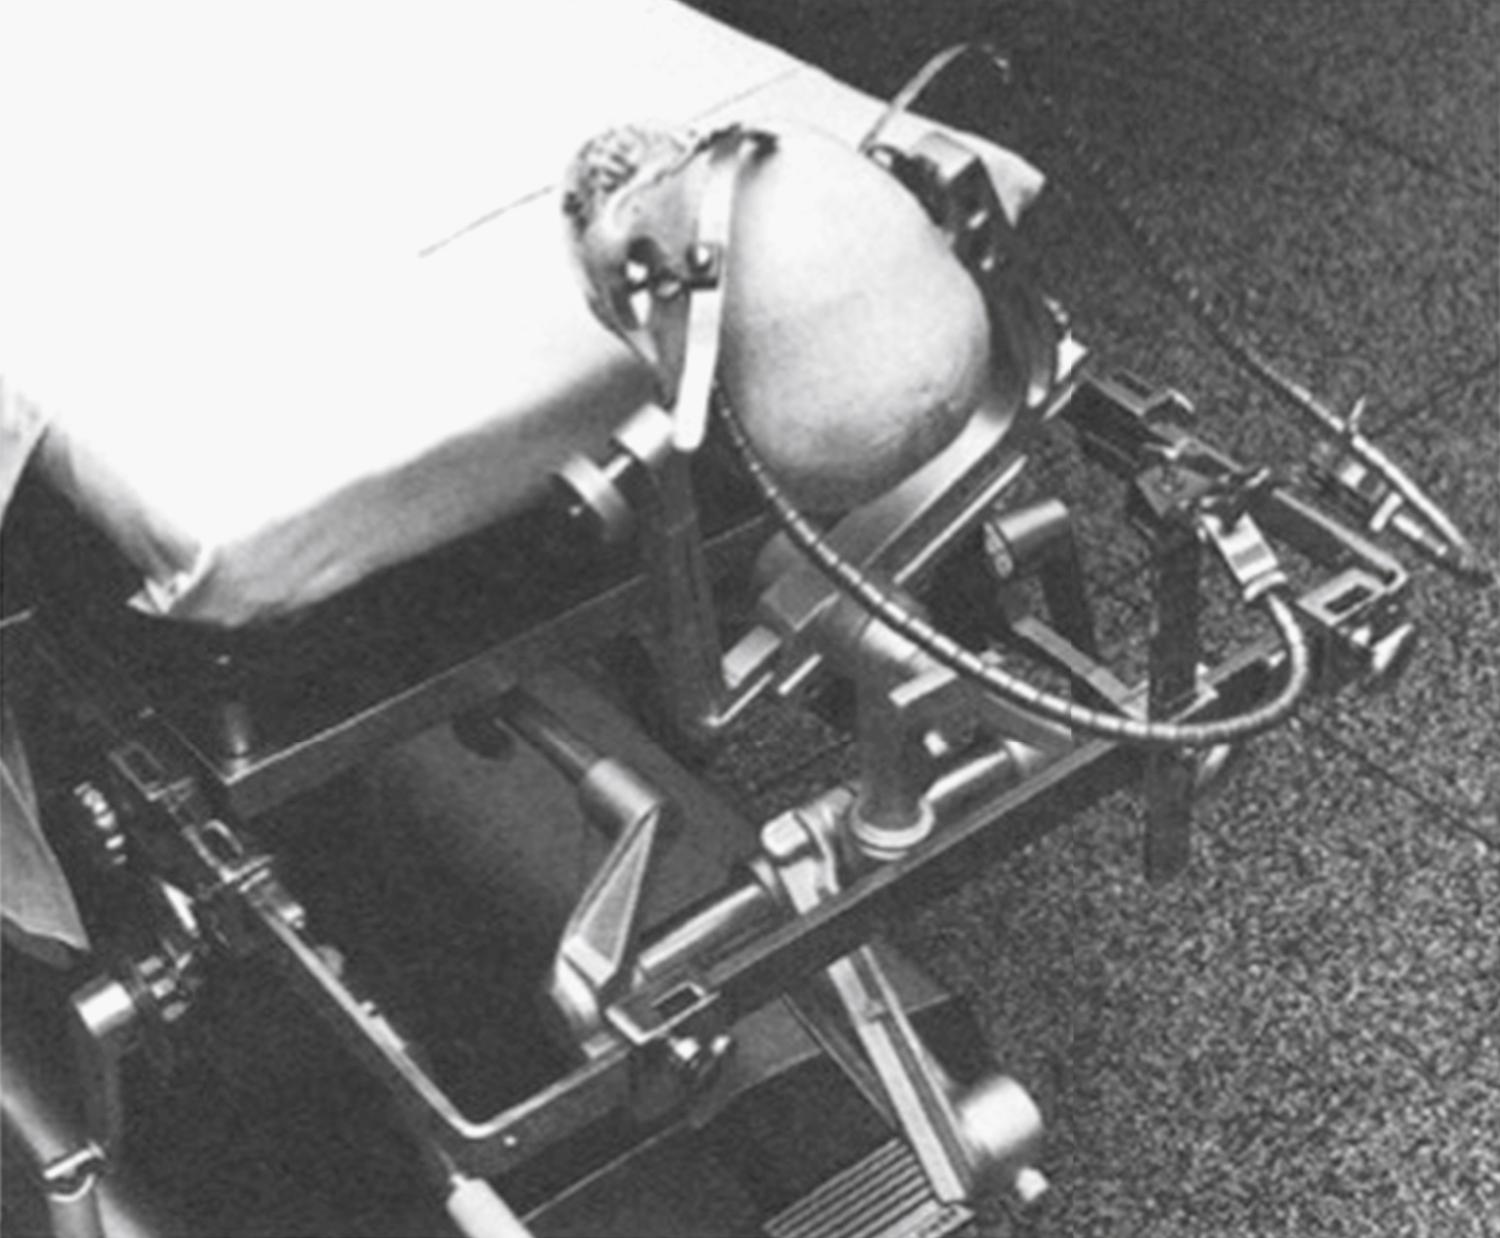 eFigure 33.10, In this photograph, a Yaşargil-Leyla brain retractor with double arm has been attached to the extracranial holder. This equipment is positioned for a right-sided craniotomy.